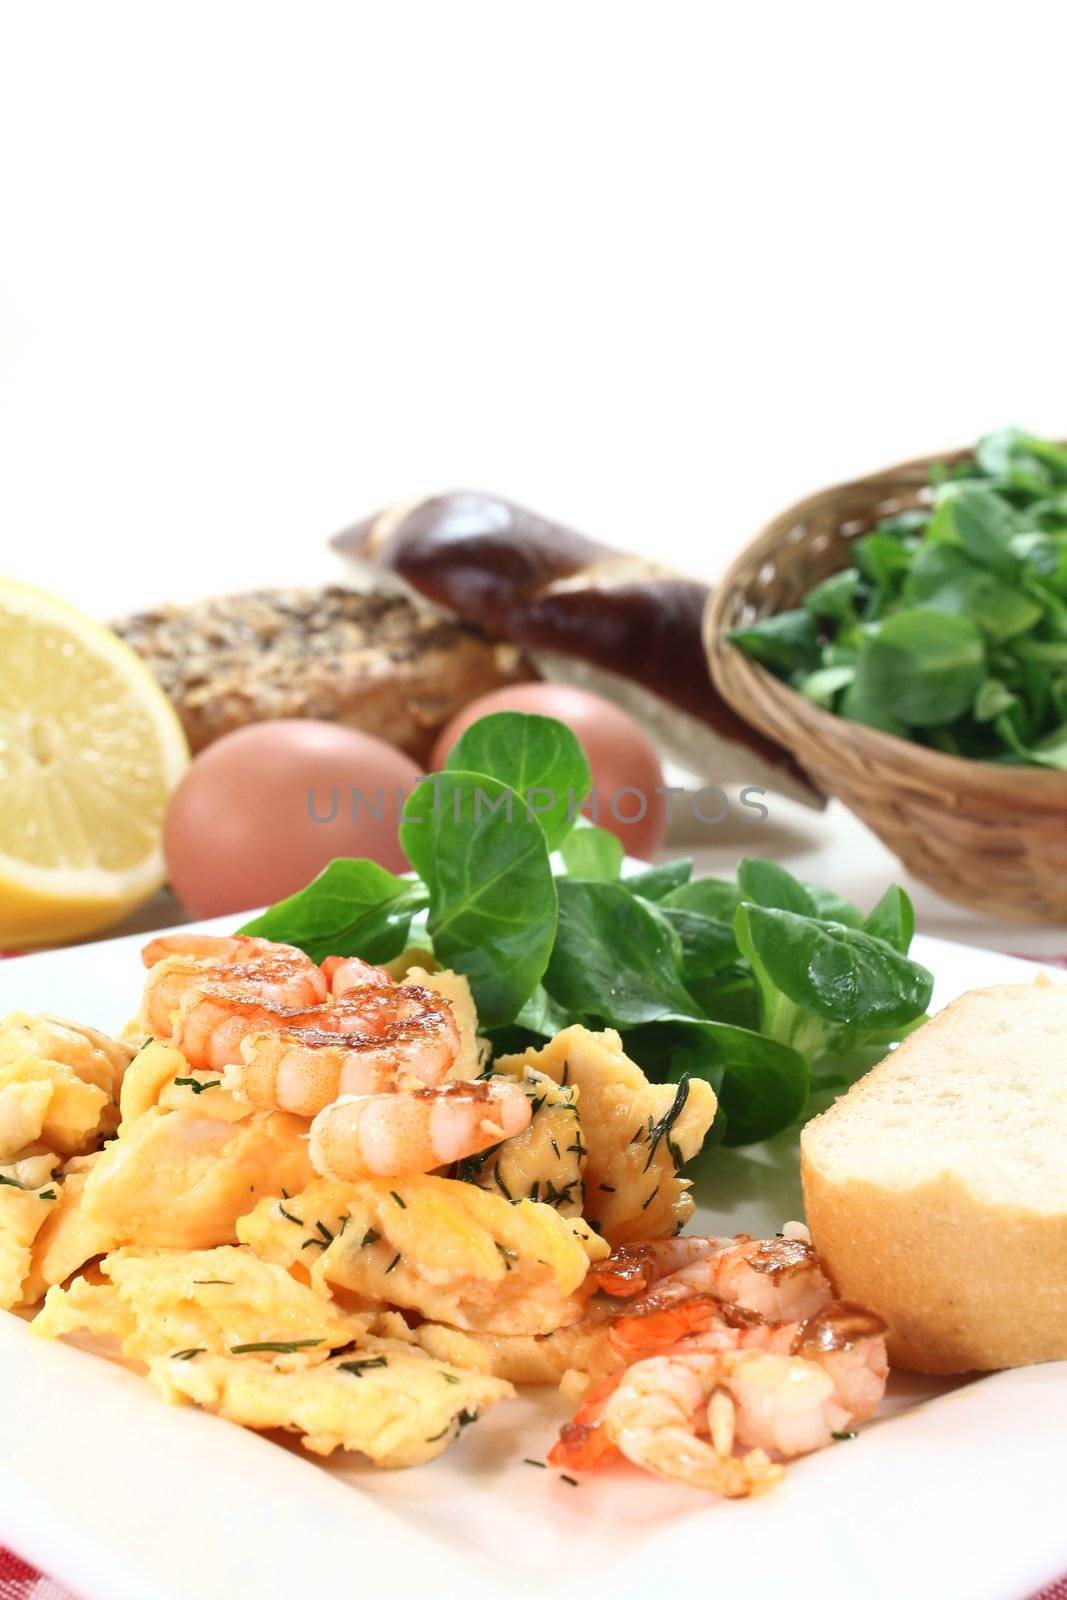 Scrambled eggs with shrimp, dill and corn salad on a plate